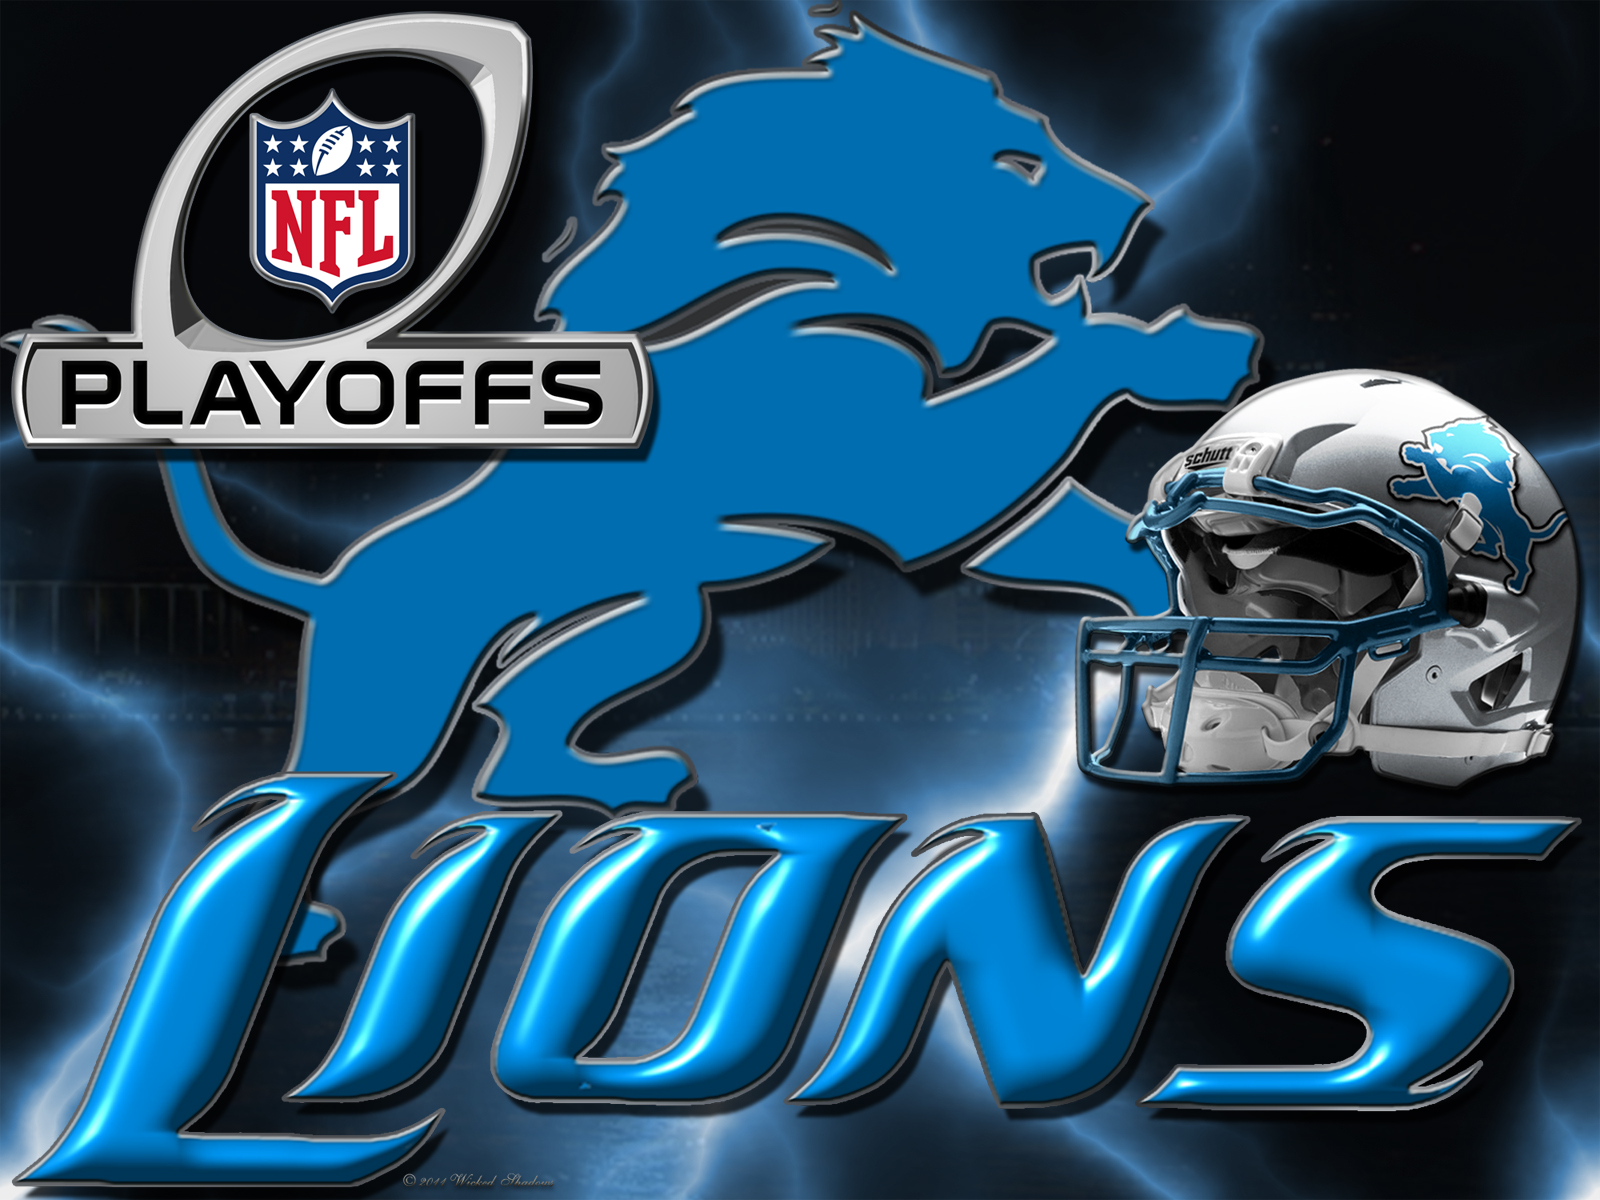 Wallpaper By Wicked Shadows Detroit Lions Playoffs